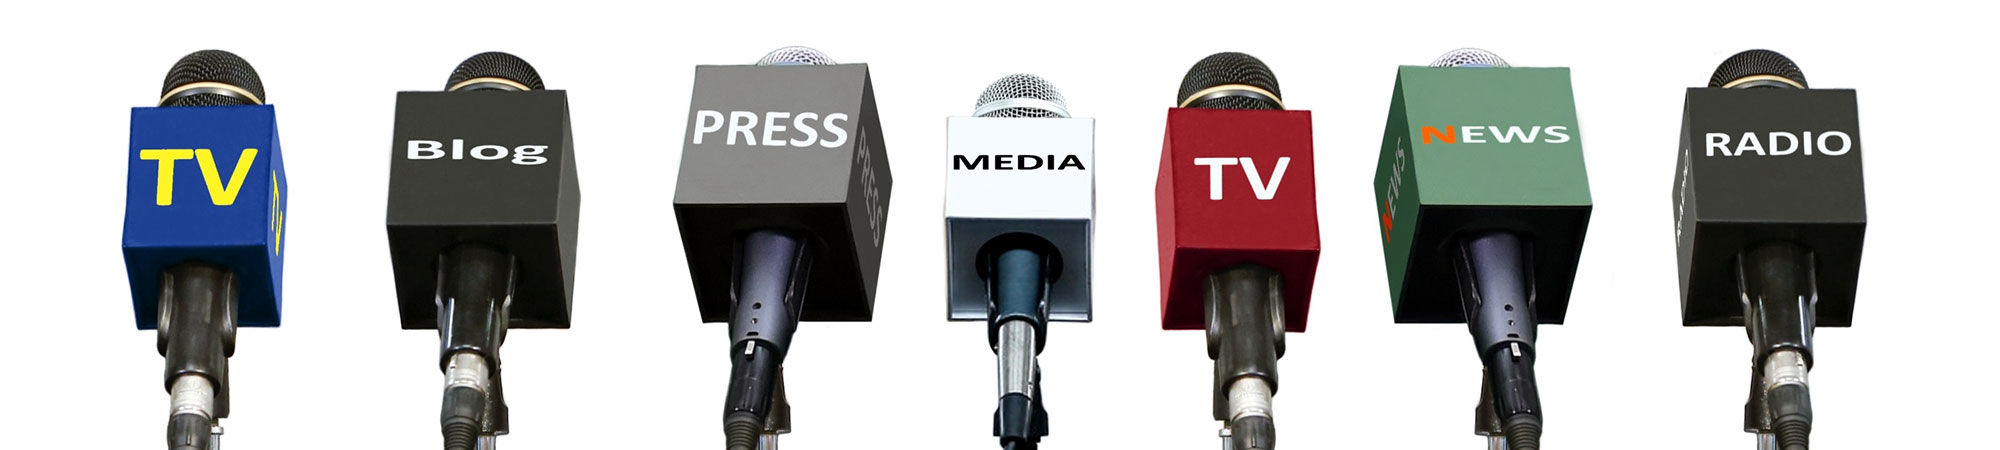 Banner showing microphones with different media labels